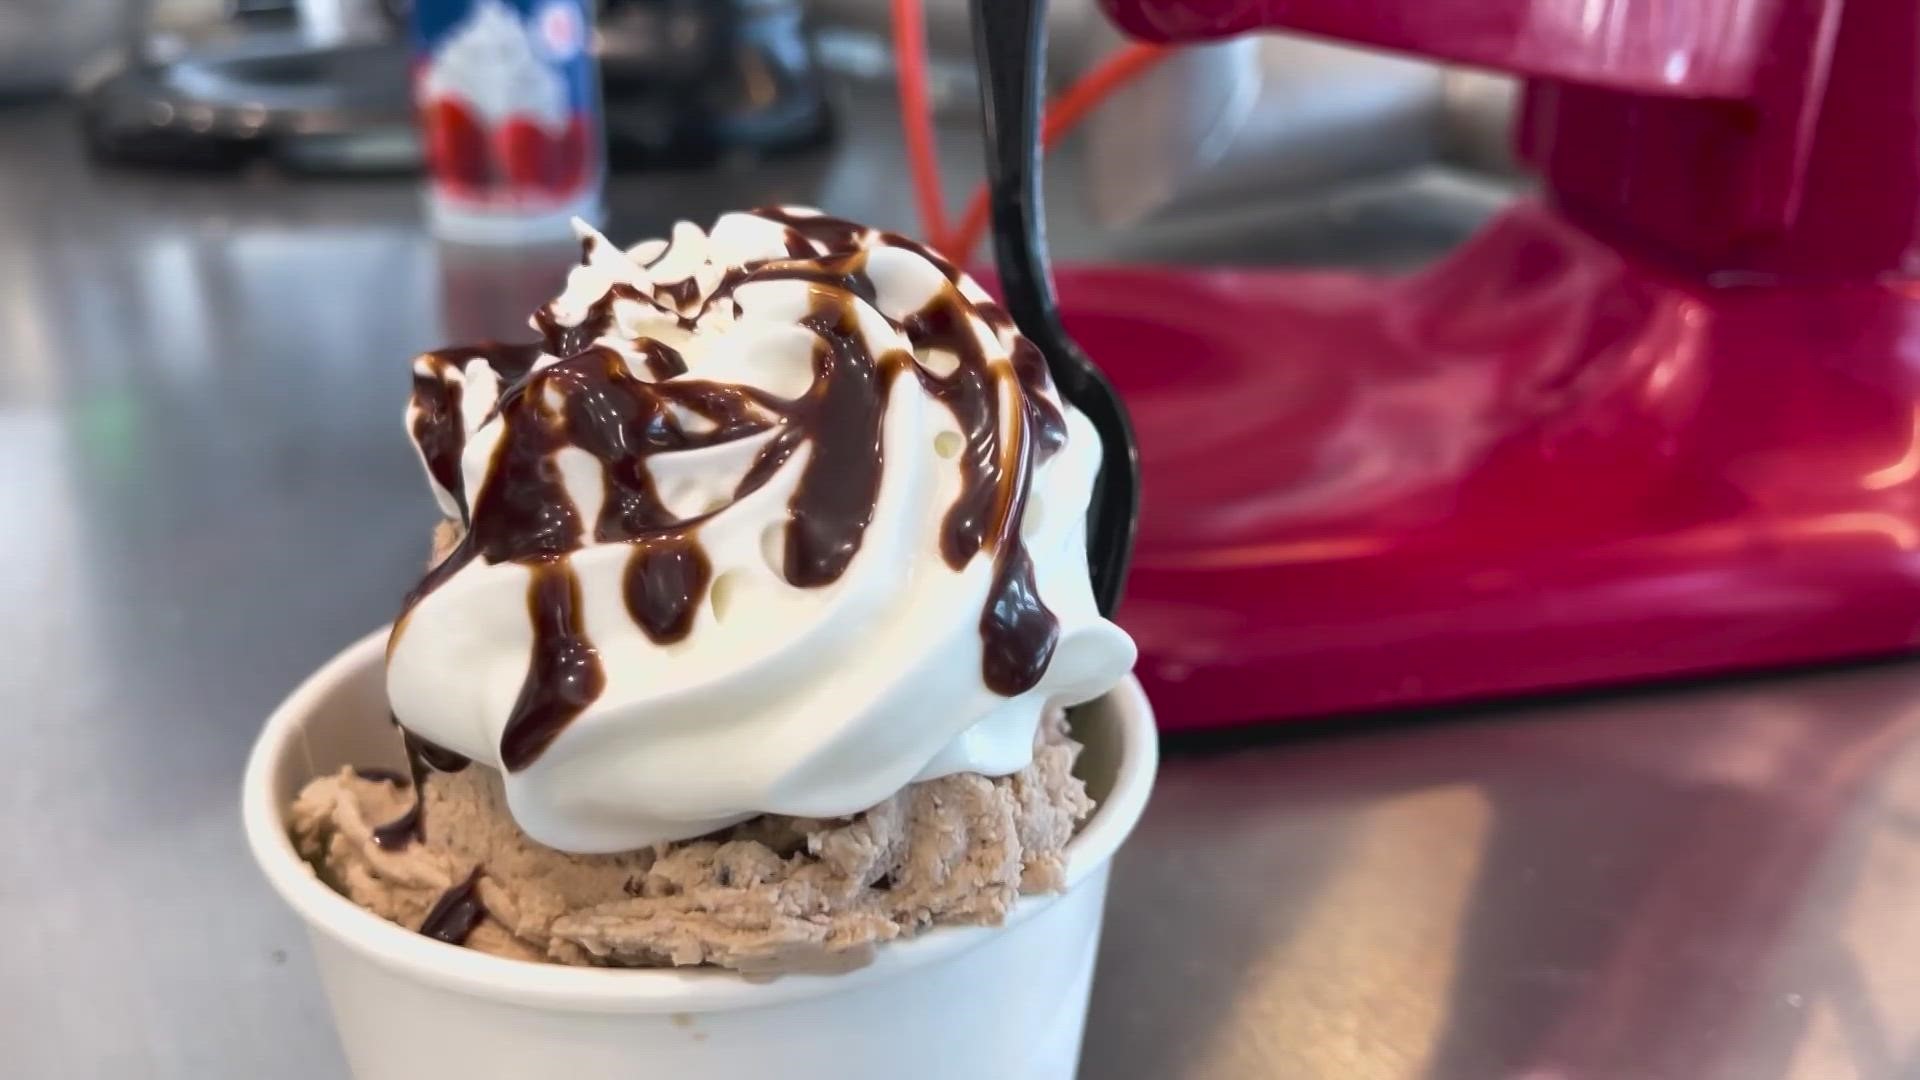 Whatever you could think of, they can make, according to the co-owner of a local Buzzed Bull Creamery.